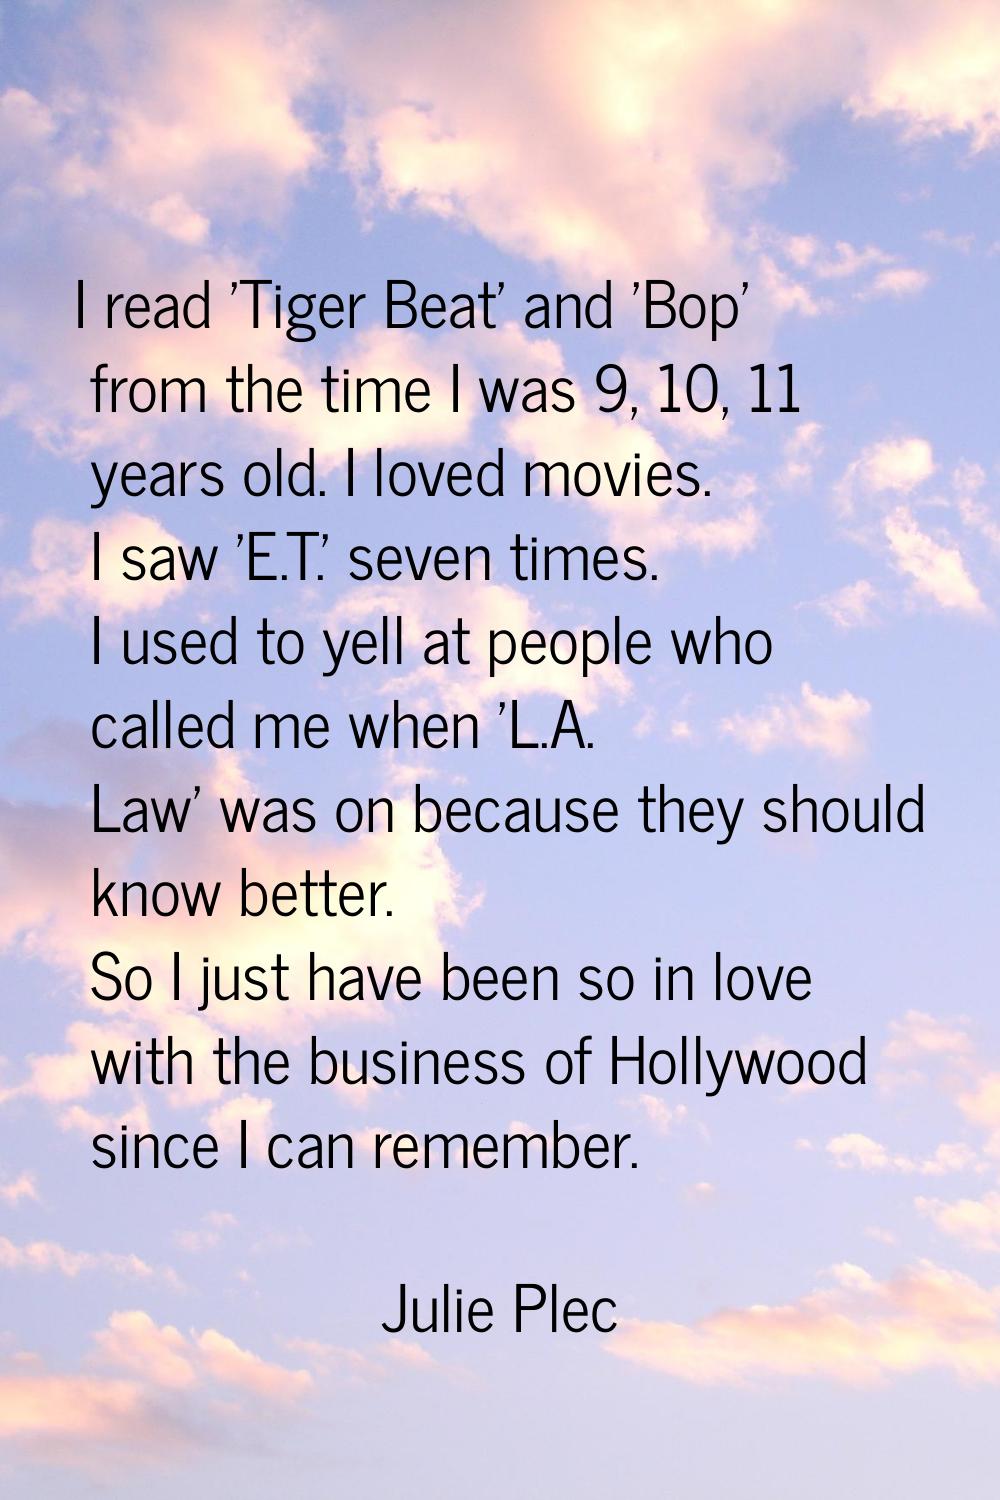 I read 'Tiger Beat' and 'Bop' from the time I was 9, 10, 11 years old. I loved movies. I saw 'E.T.'